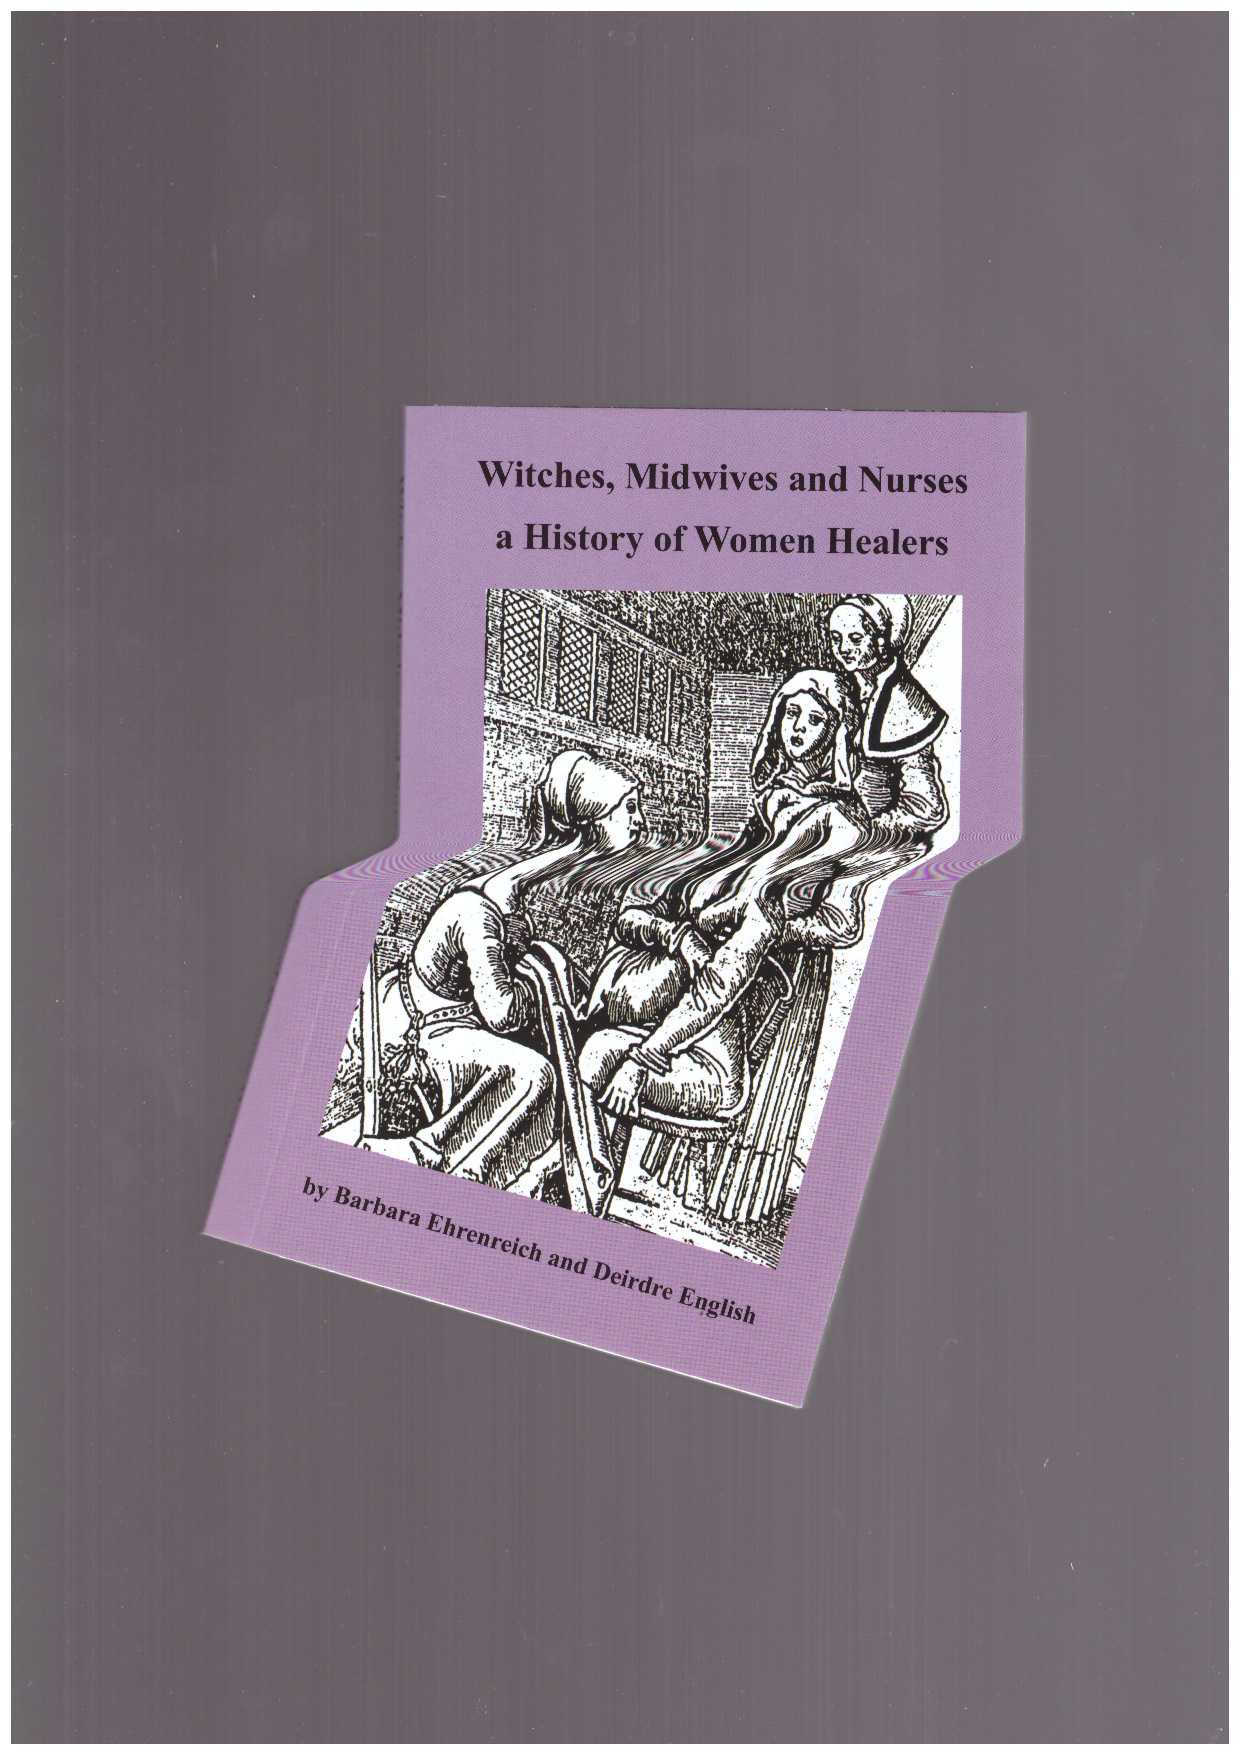 EHRENREICH, Barbara; ENGLISH, Deirdre - Witches, Midwives and Nurses a History of Women Healers